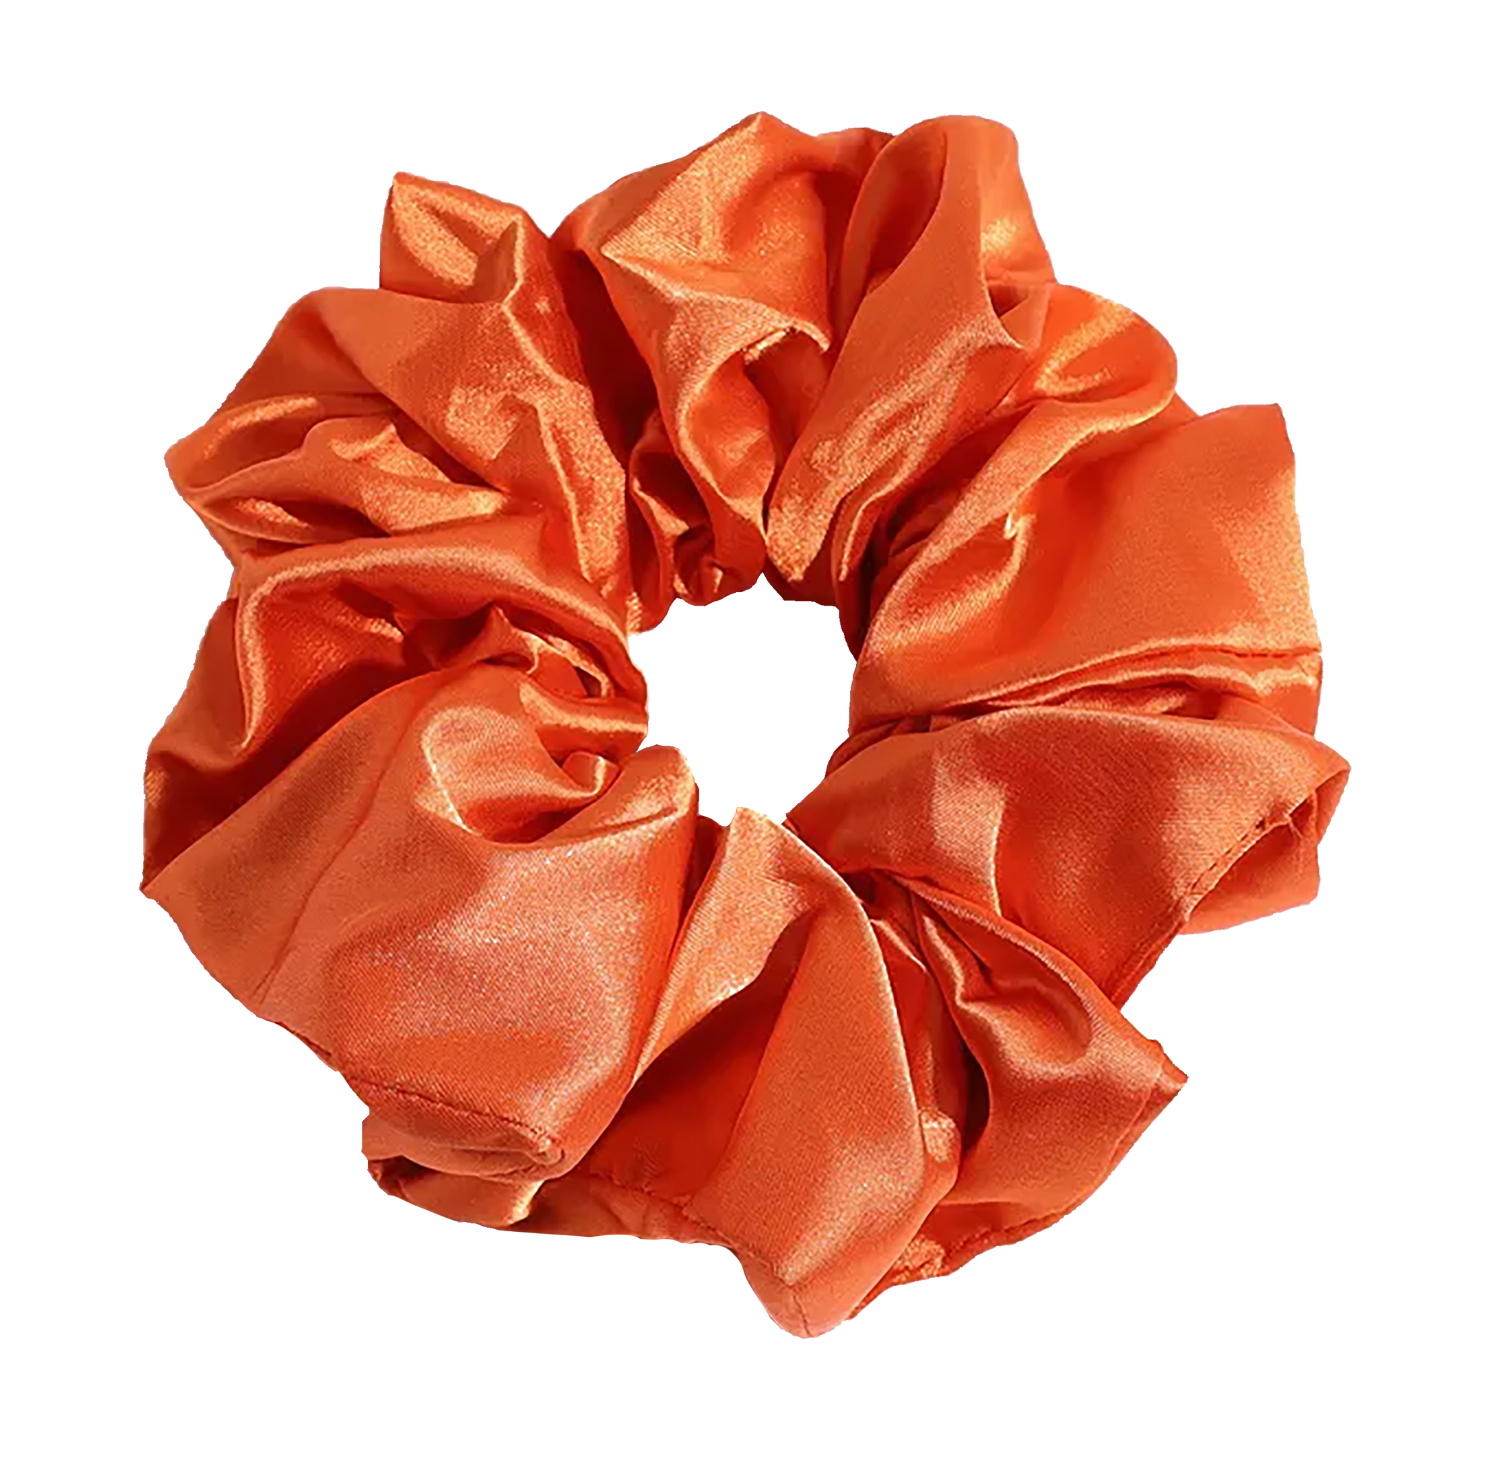 Large Ruffle Satin 'Frou-Frou' Scrunchie in Clementine